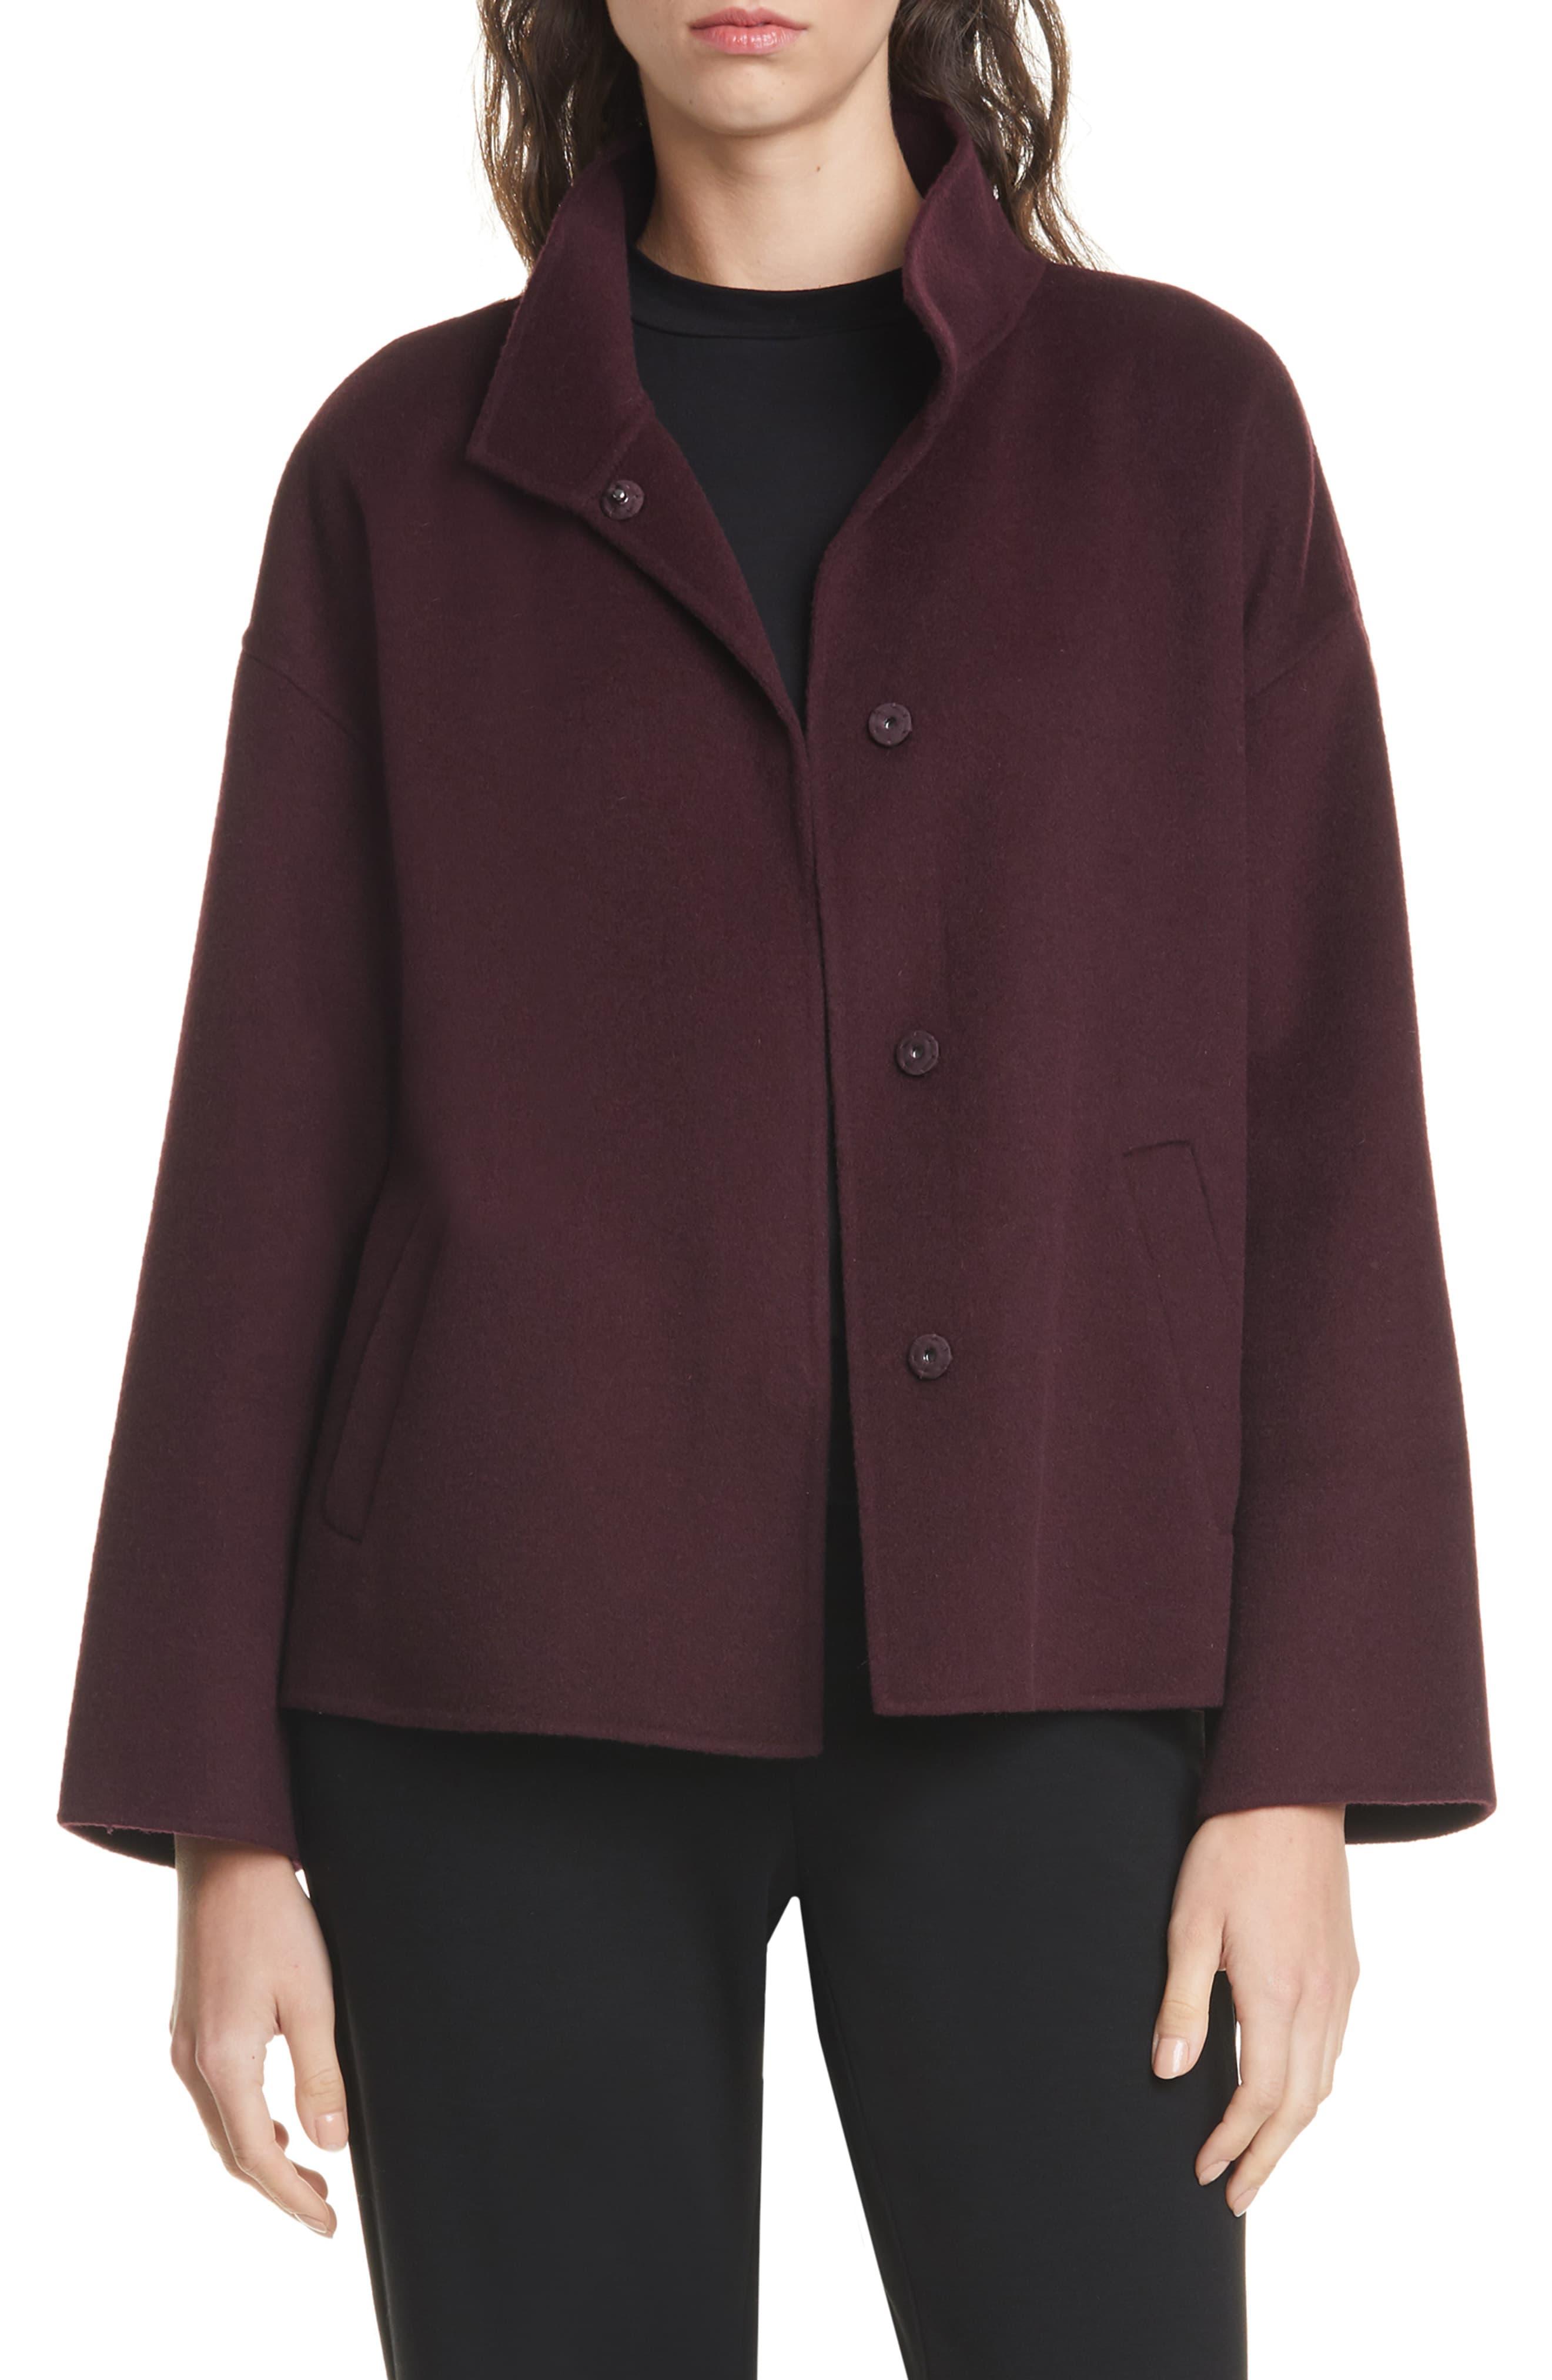 Eileen Fisher Cashmere Stand Collar Boxy Coat in Purple - Lyst